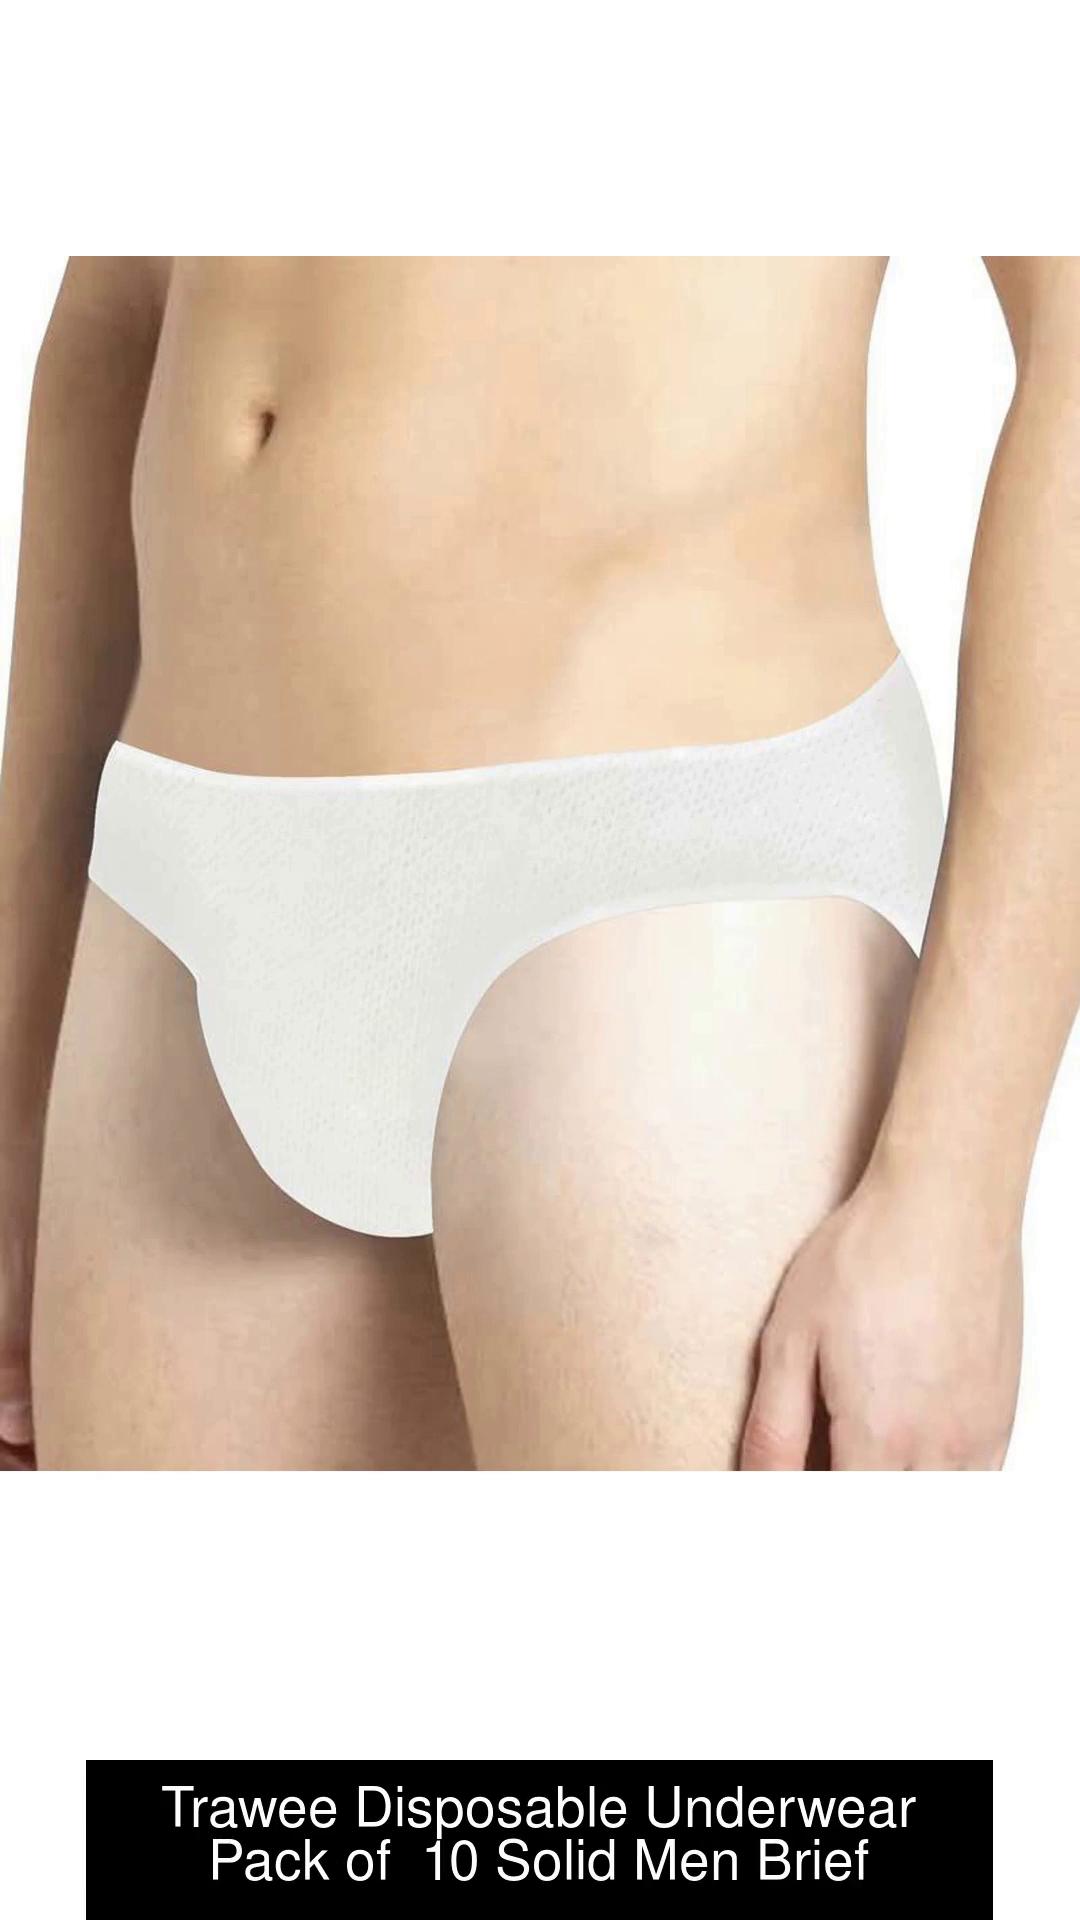 Trawee Travel Disposable Panty for Women for Regular Use, Use